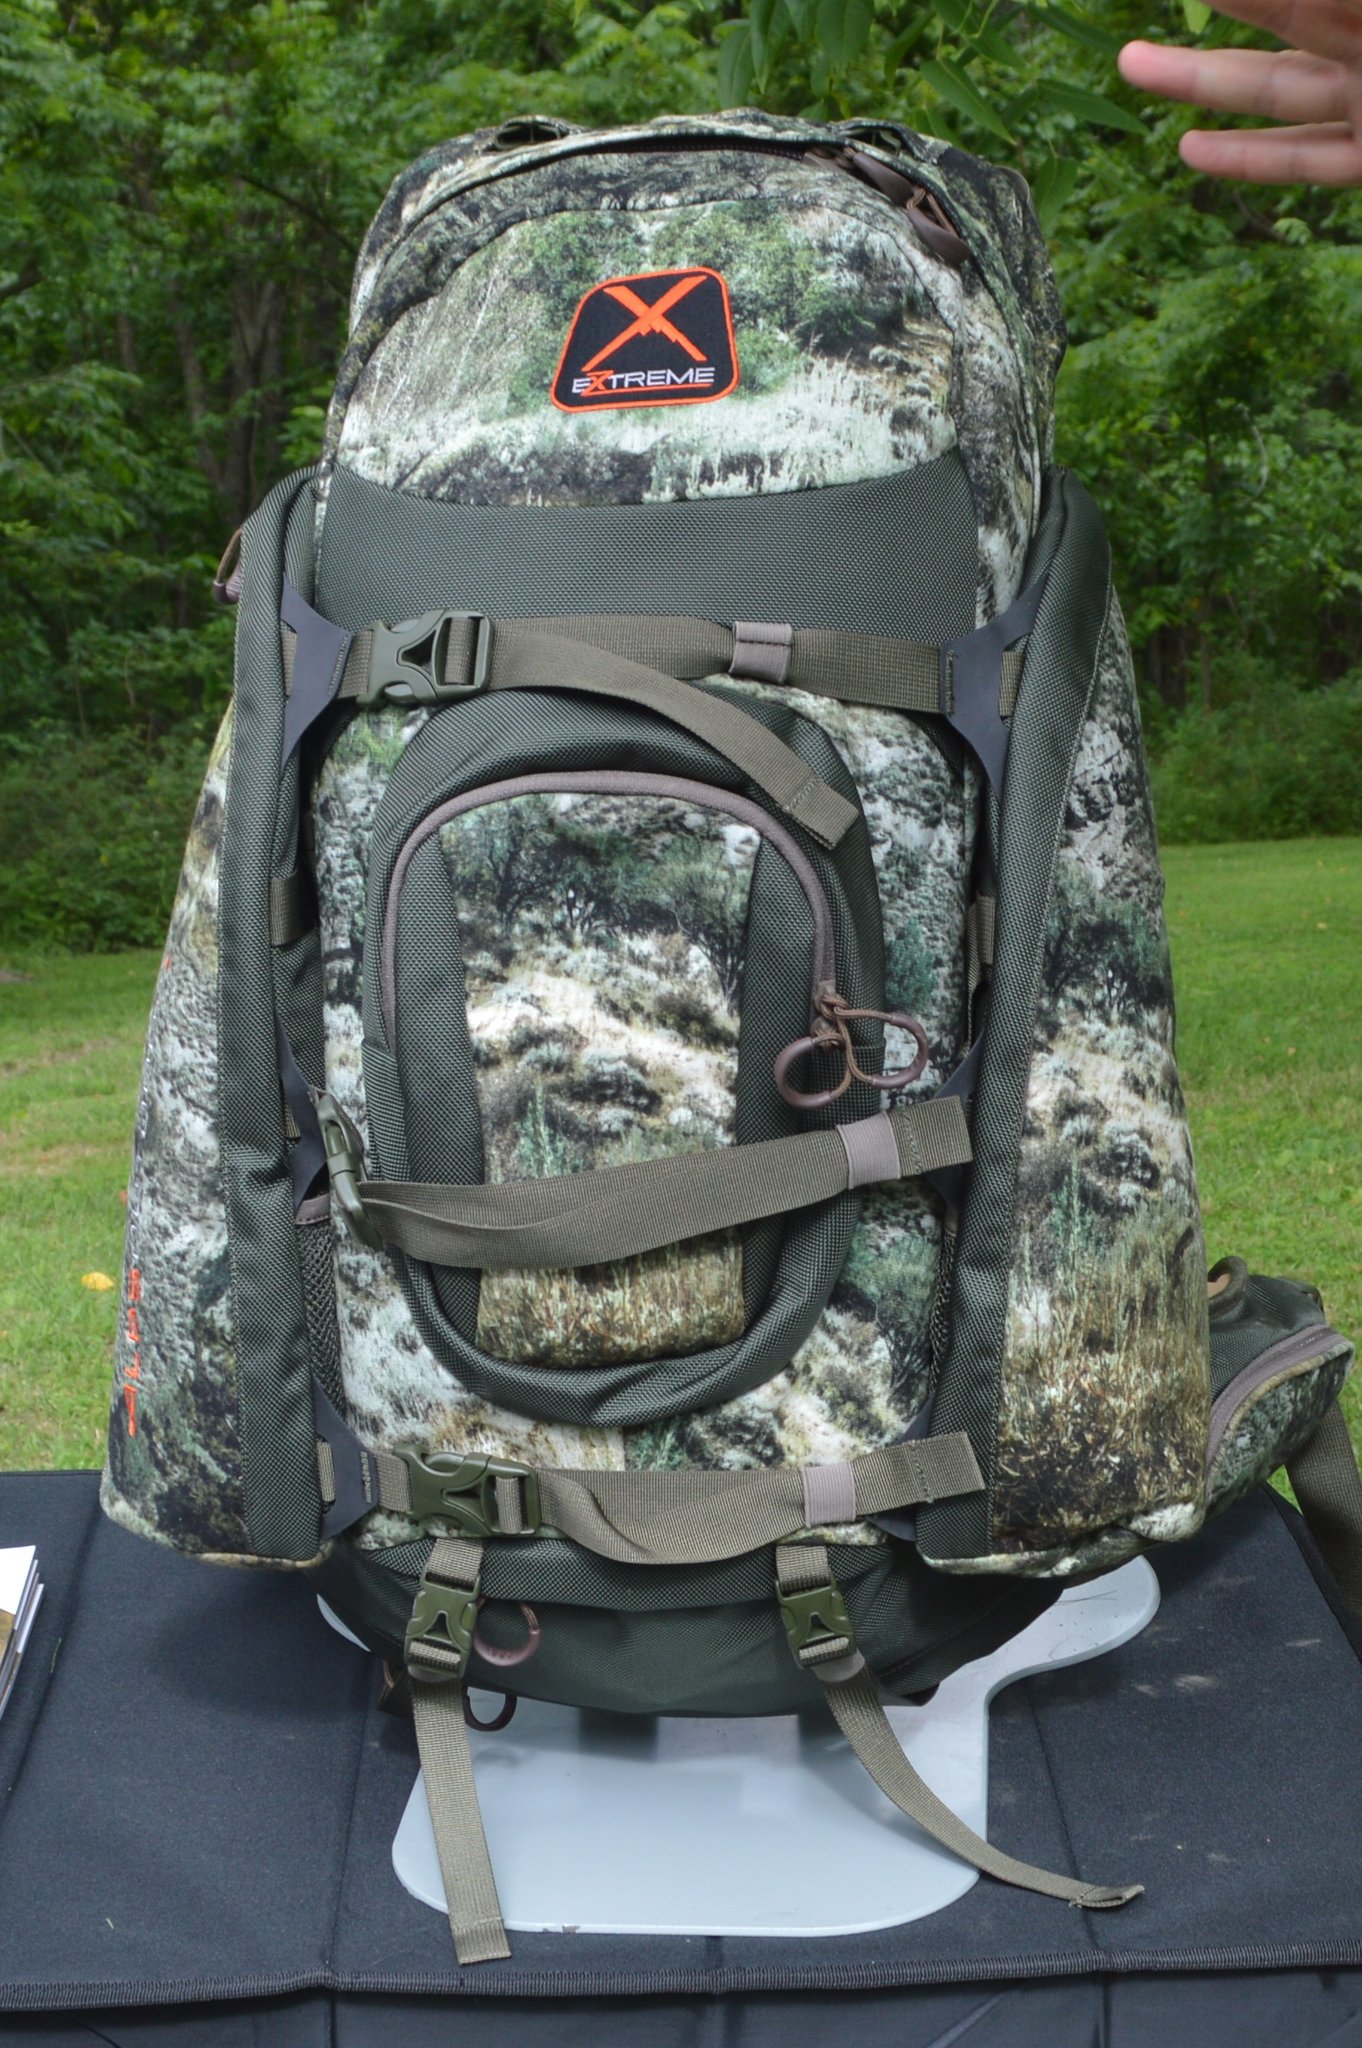 One of the most popular of Alps packs is this Traverse X. Not only is it a capable backcountry rig with molded foam suspension, there's also a bow/gun dropdown pocket, shooting stick/tripod holder, hydration pocket, and a rain cover, but the pack doubles as a meat hauler. (Photo: Kristin Alberts)